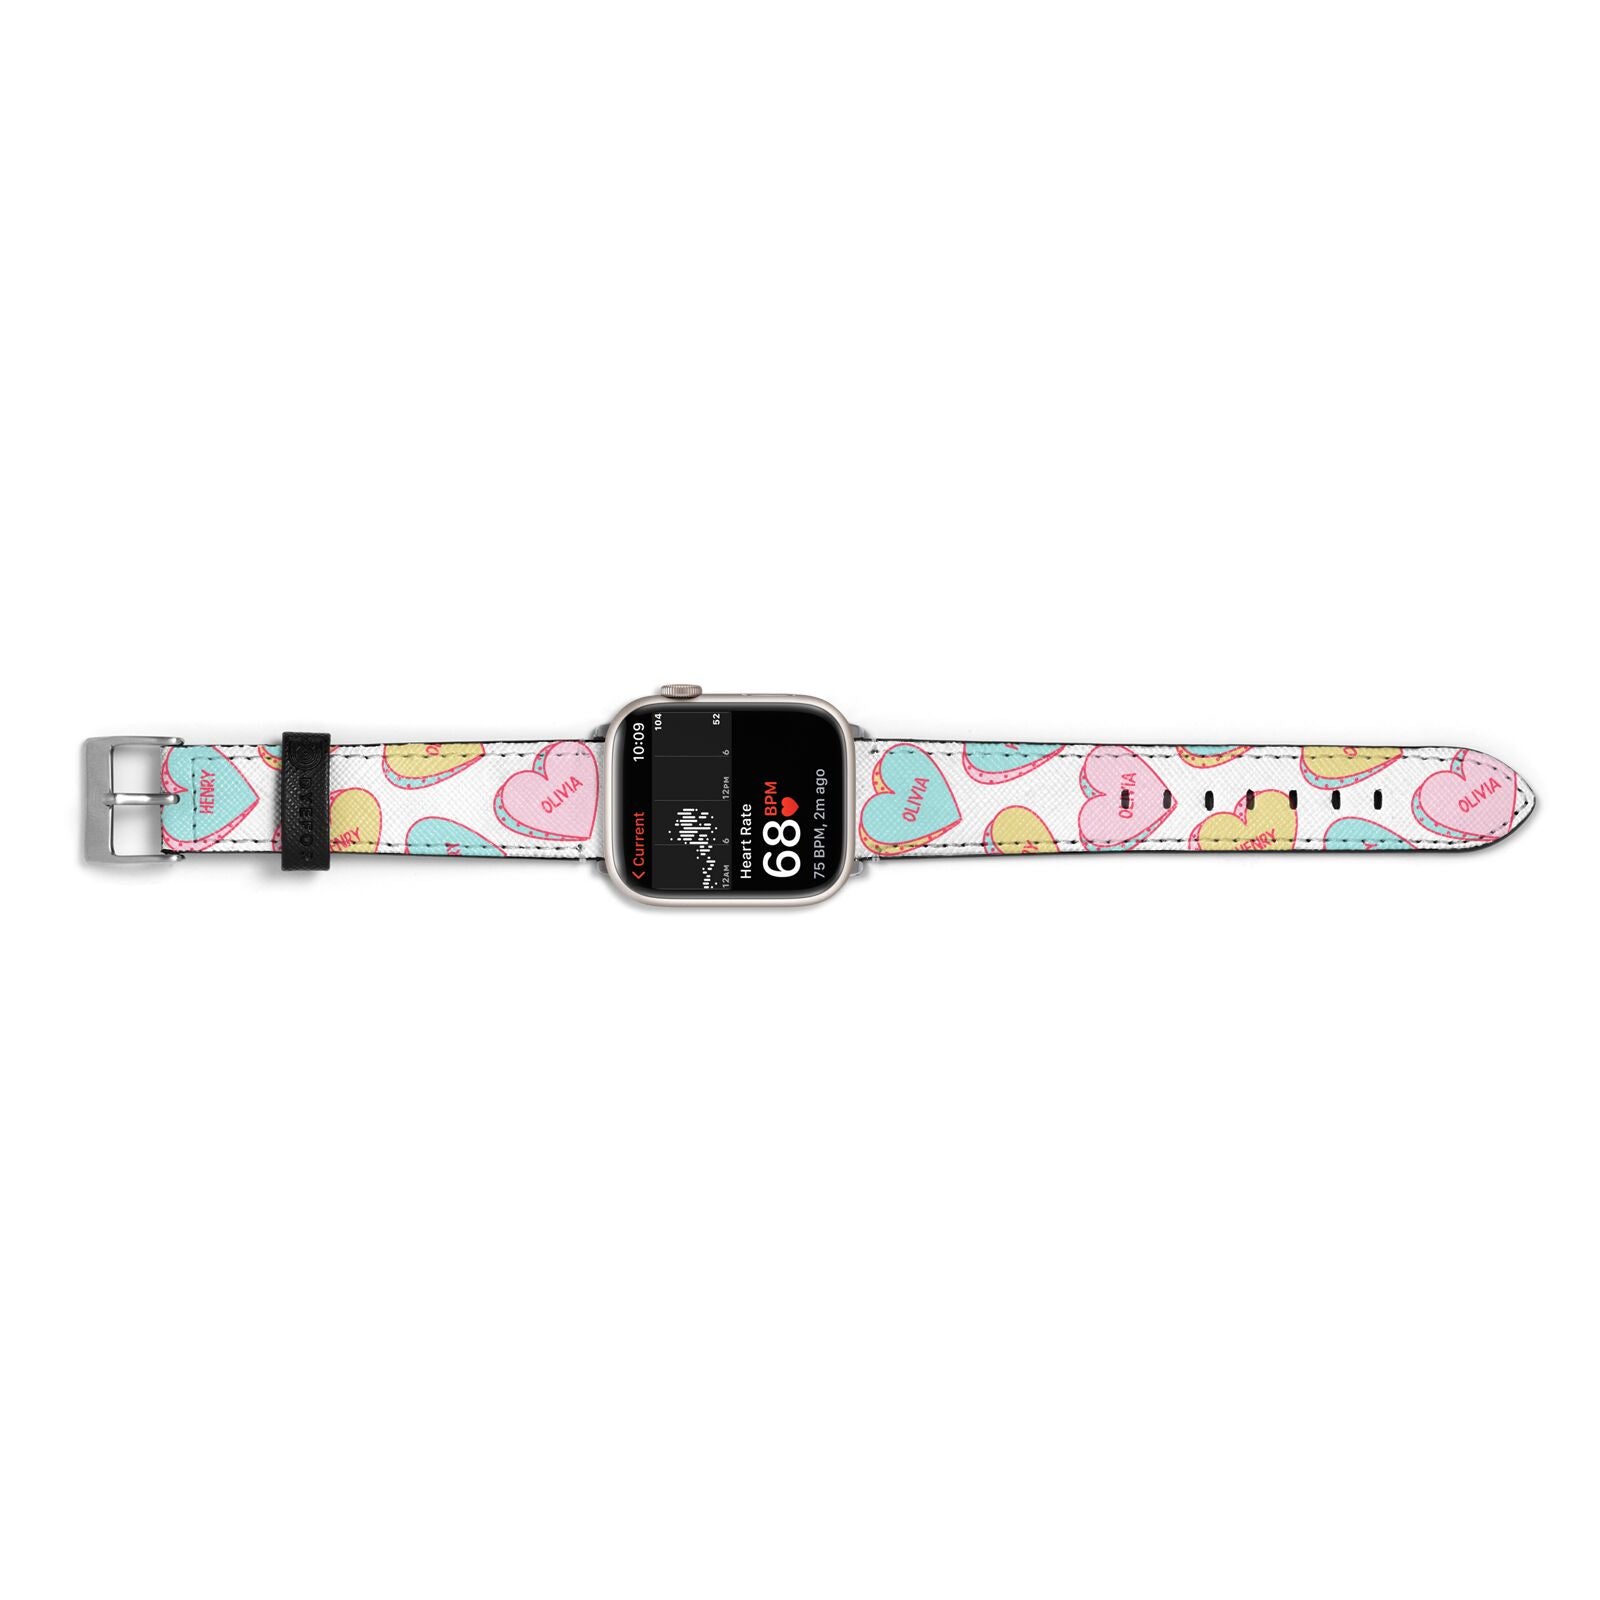 Personalised Heart Sweets Apple Watch Strap Size 38mm Landscape Image Silver Hardware